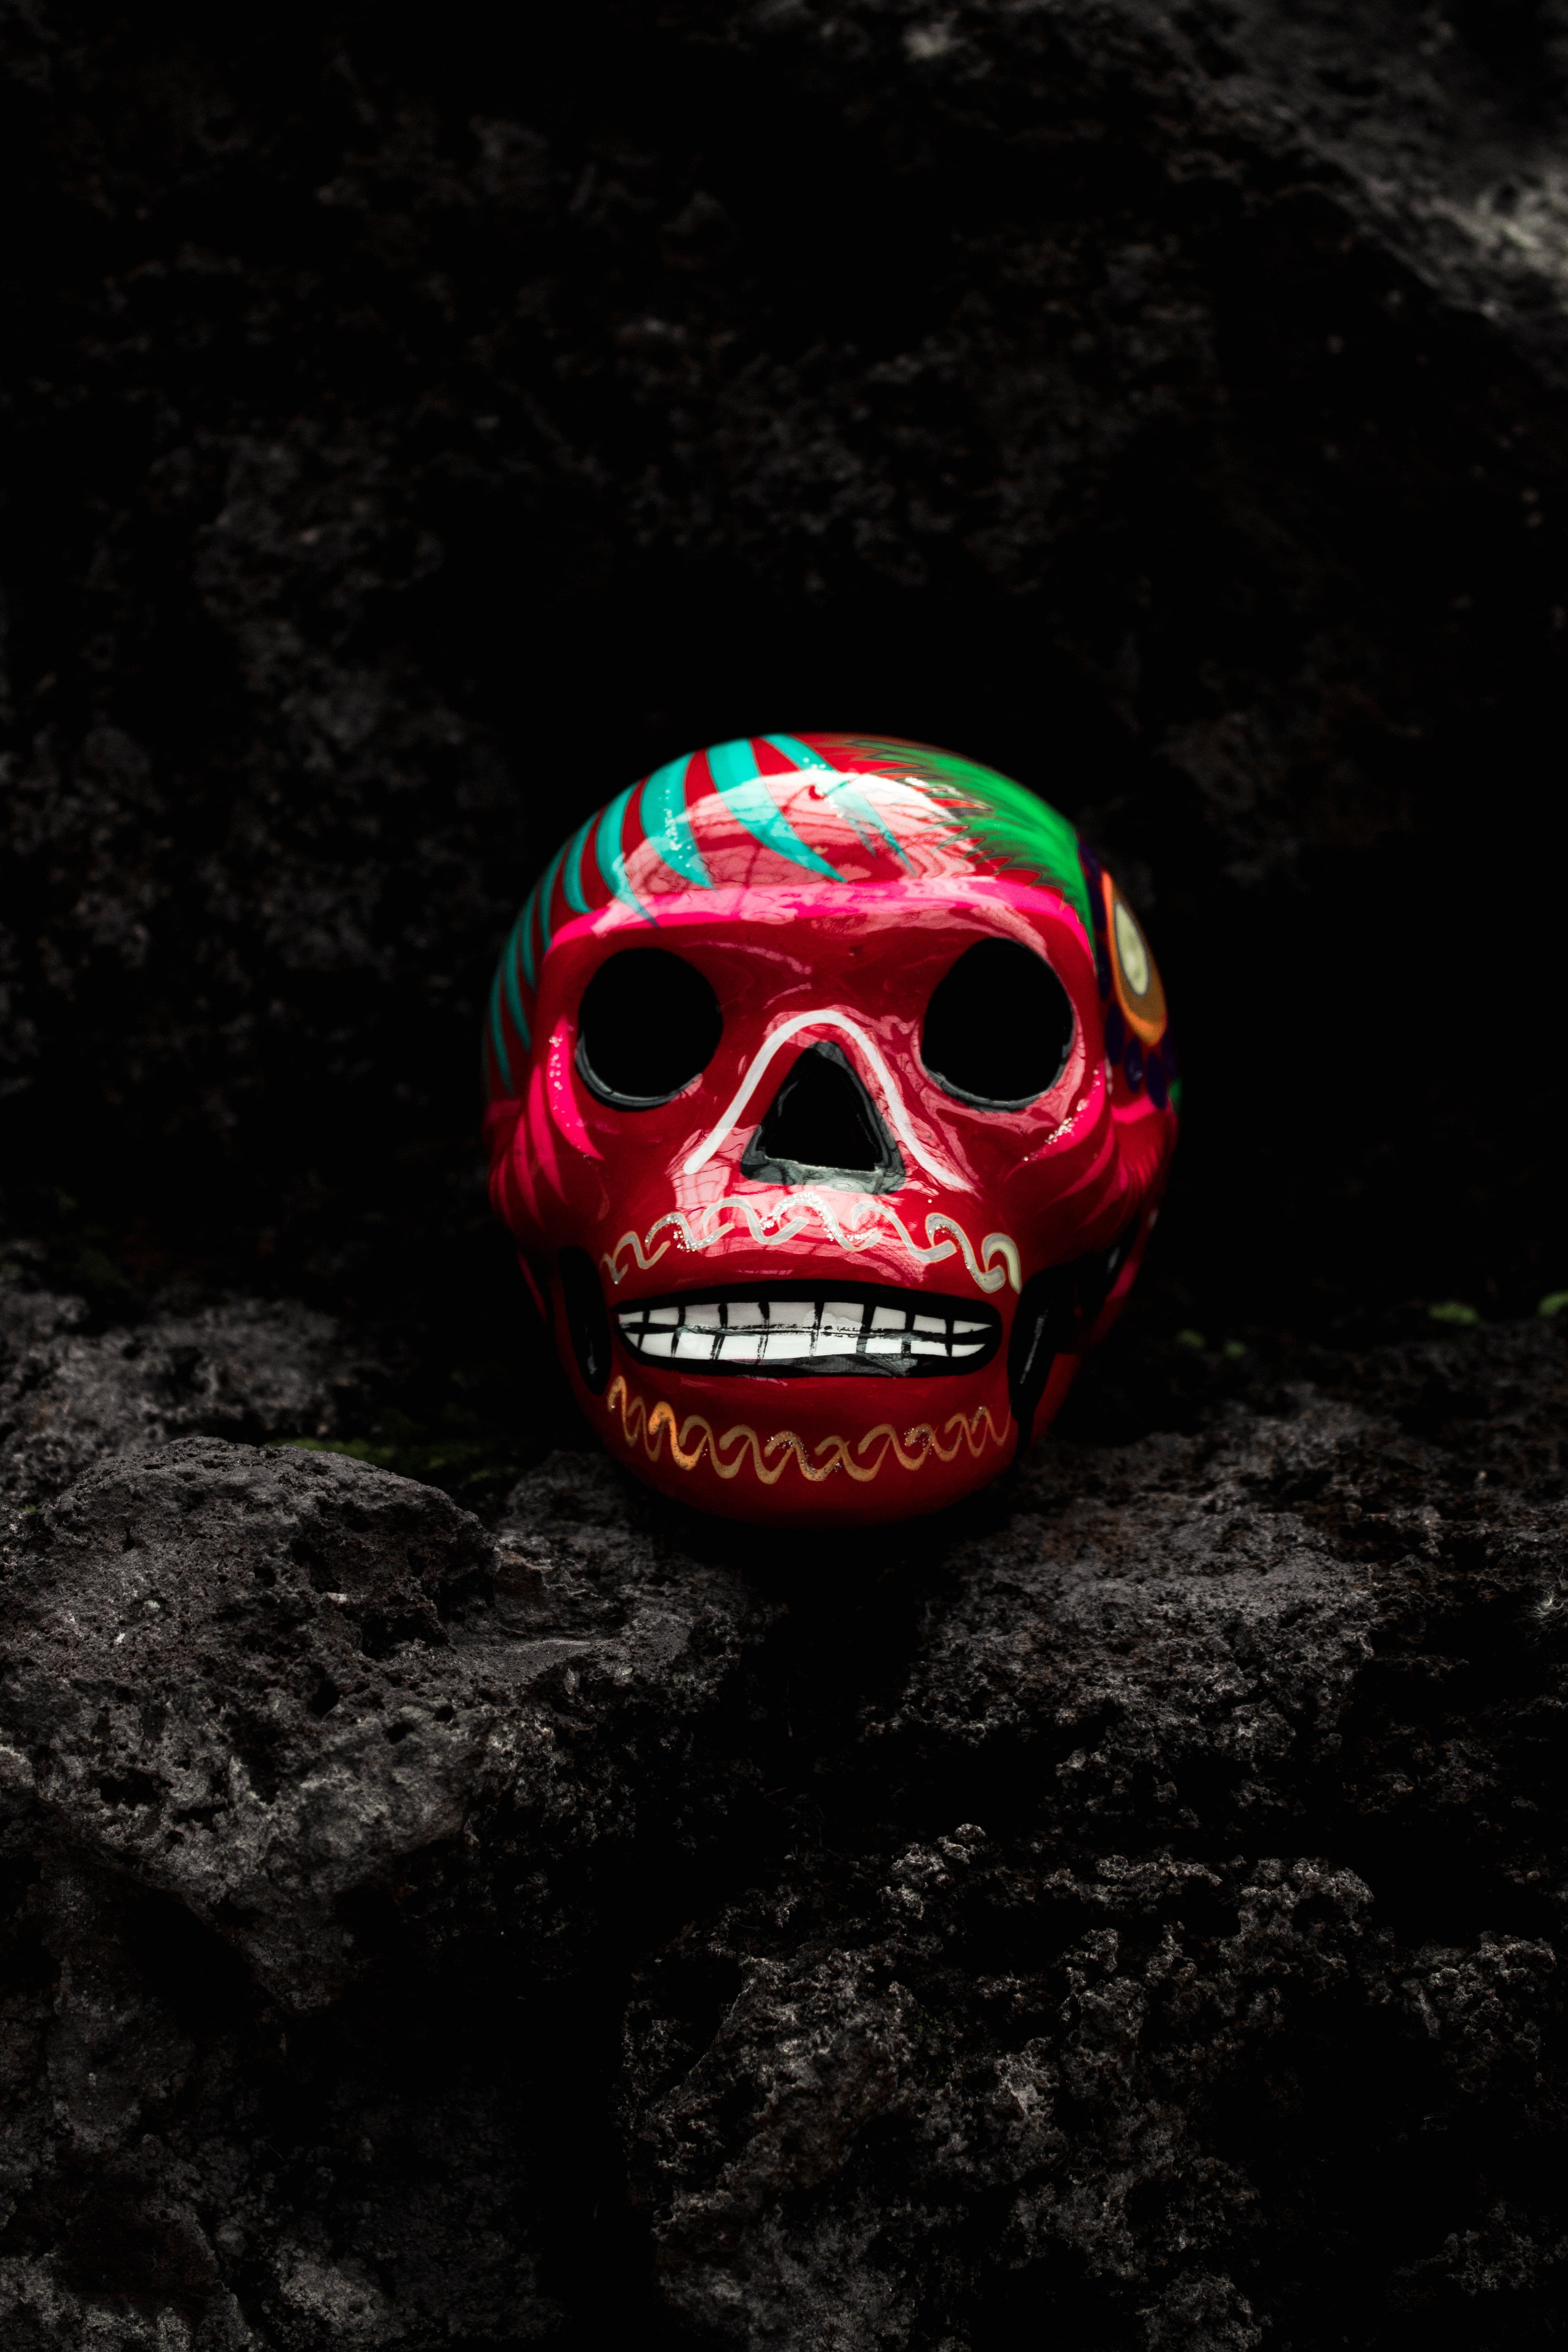 red, green, and teal decorative skull